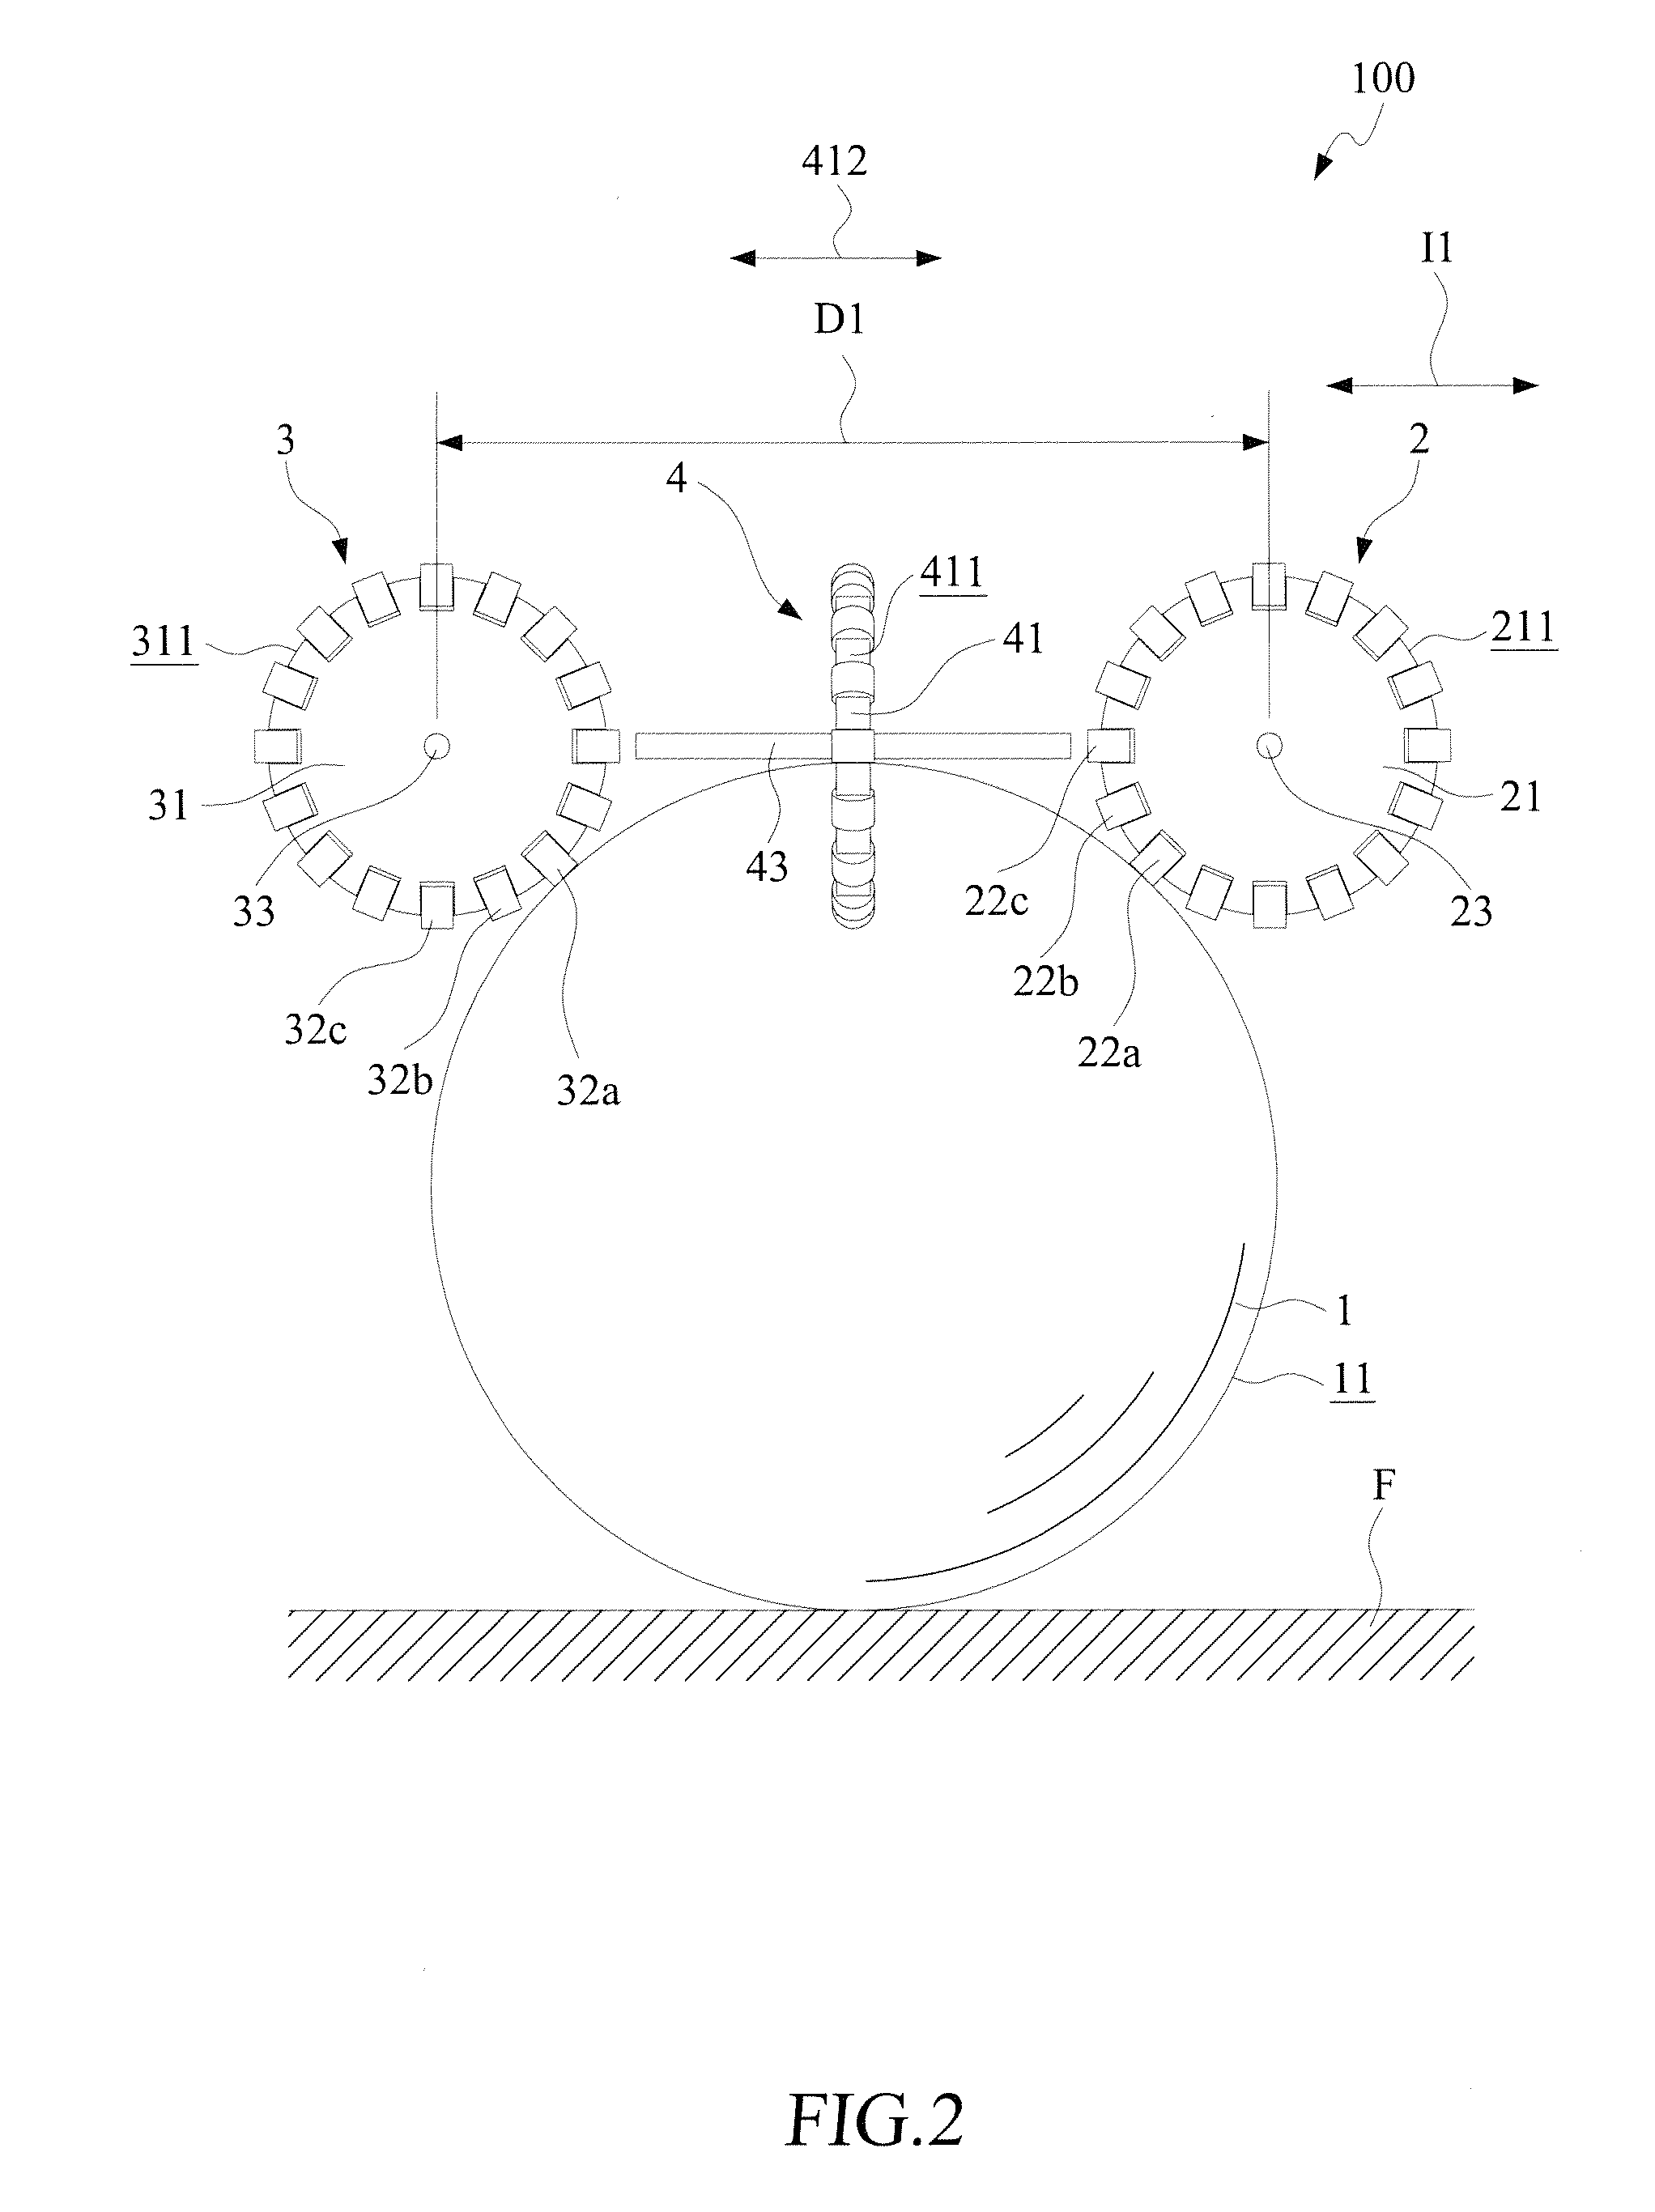 Omni-wheel based driving device with enhanced main wheel structure